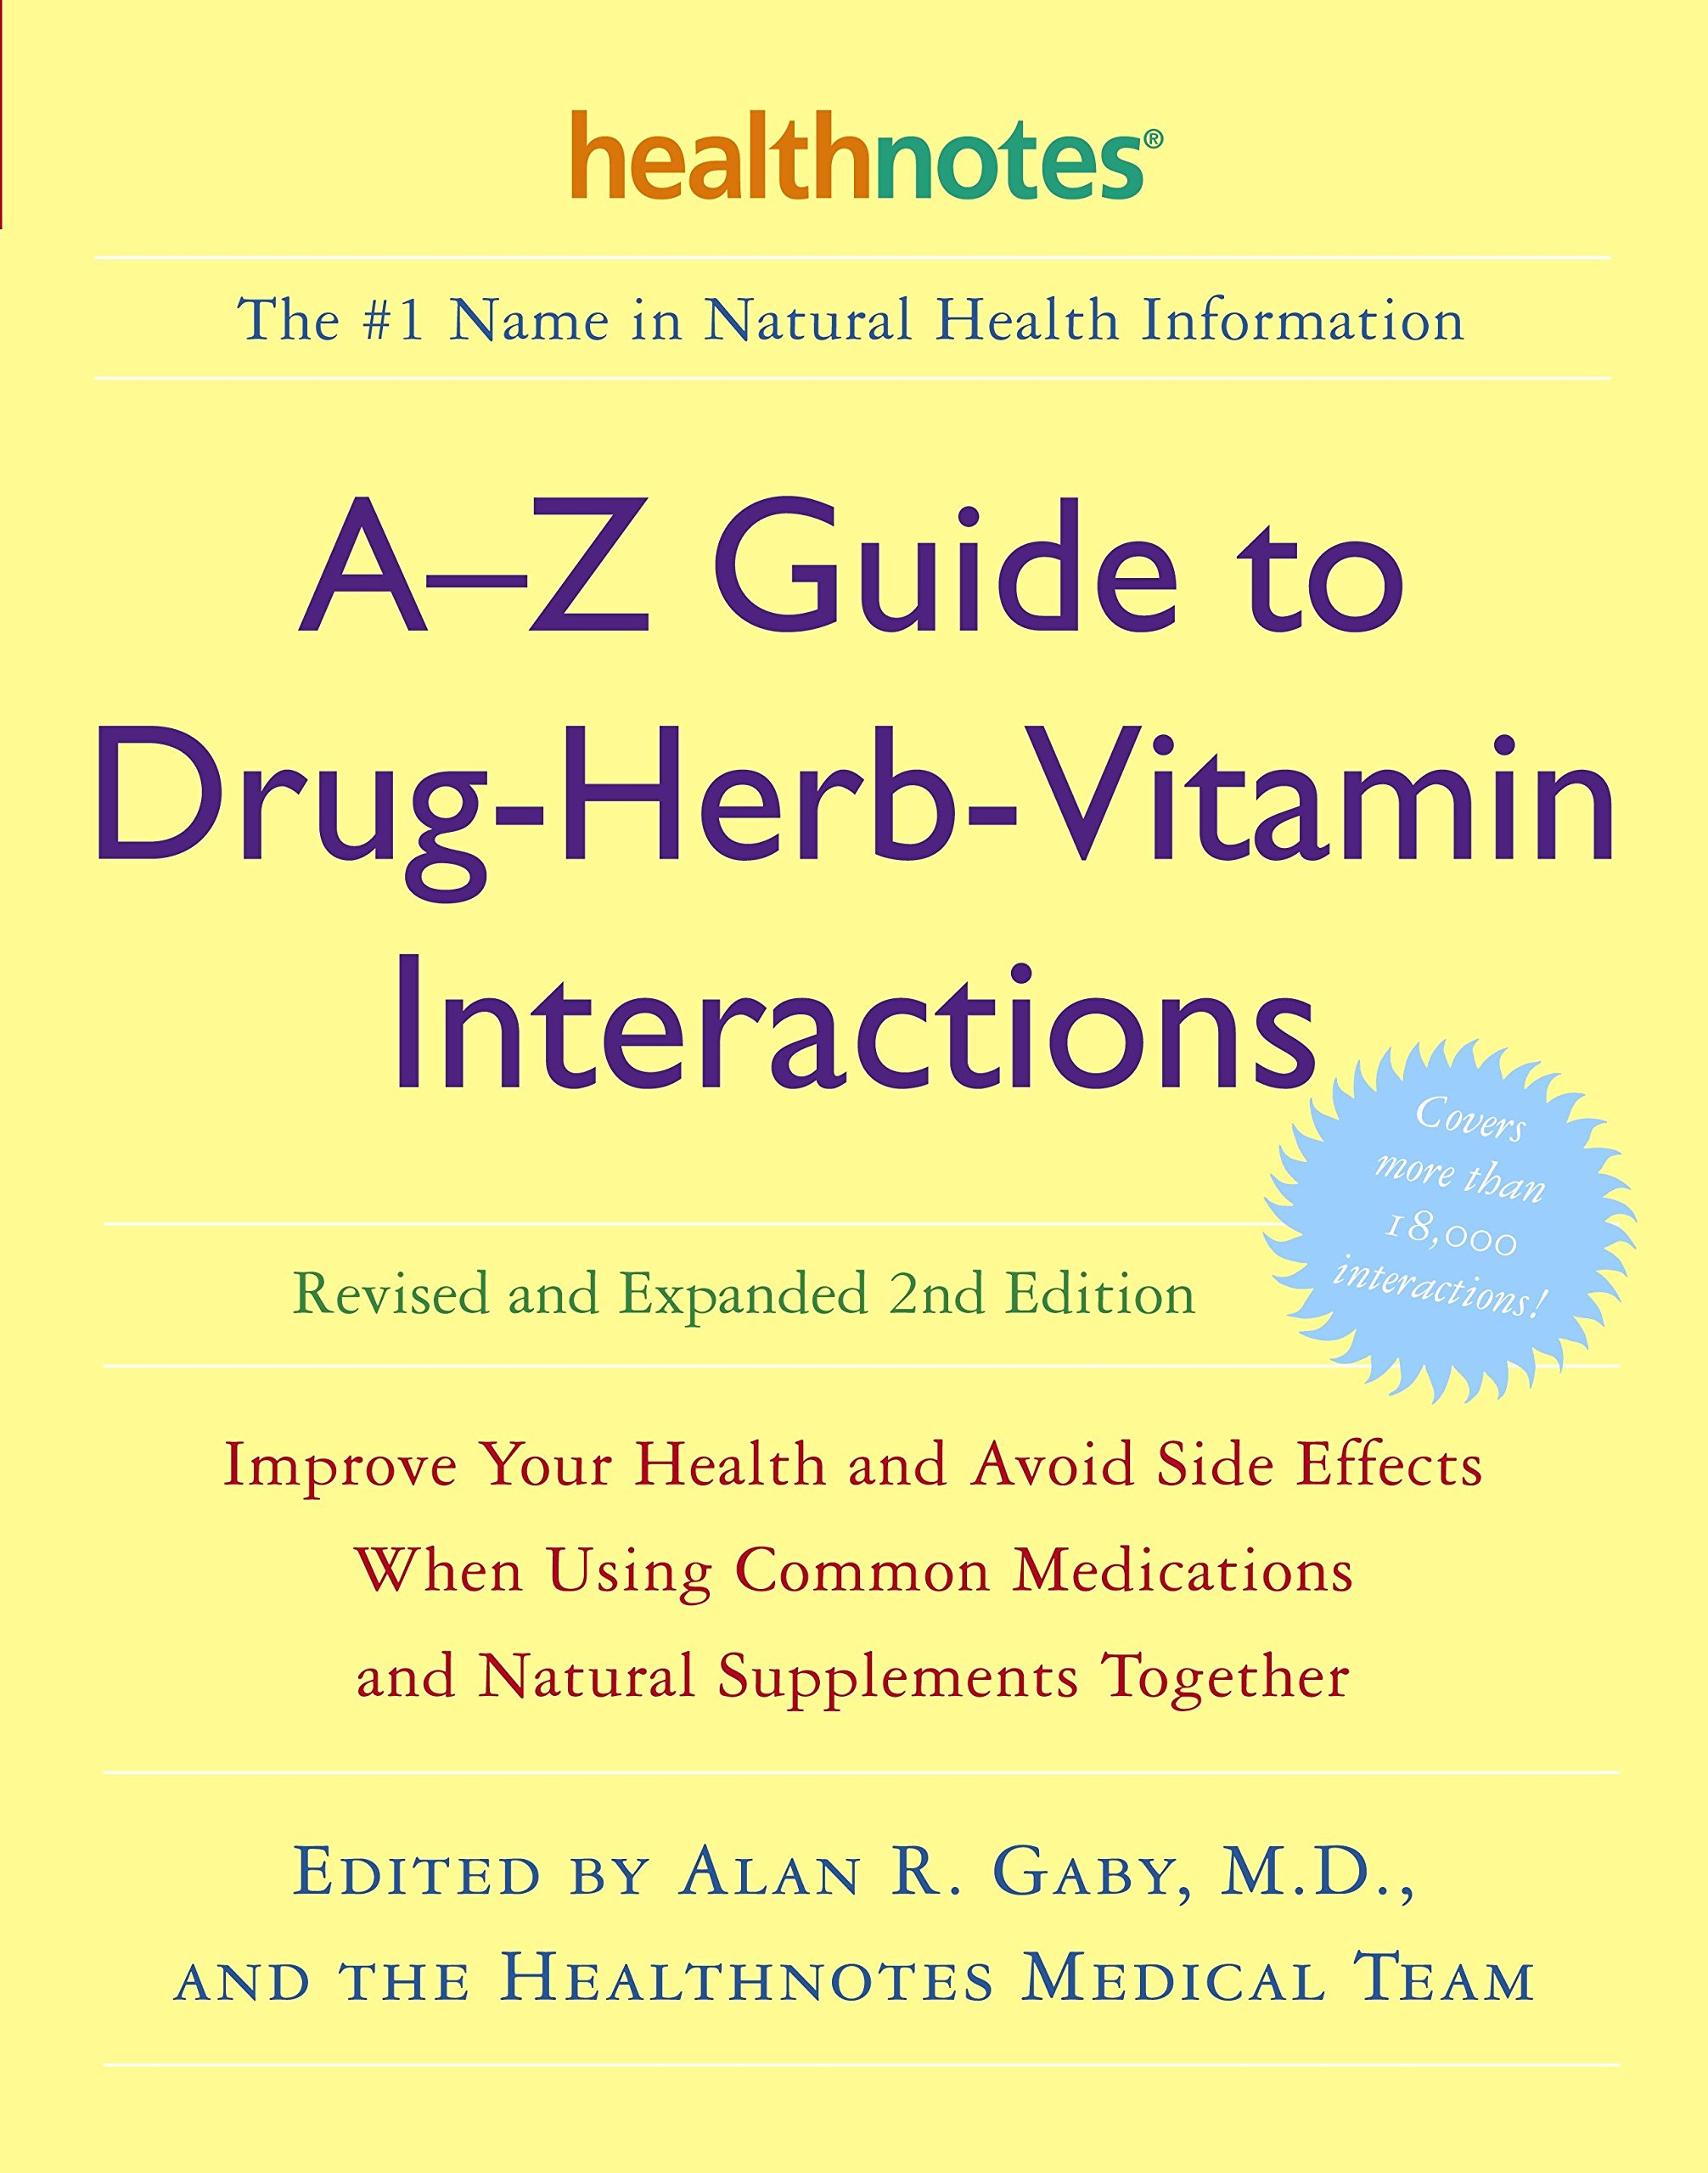 A-Z Guide to Drug-Herb-Vitamin Interactions Revised and Expanded 2nd Edition: Improve Your Health and Avoid Side Effects When Us